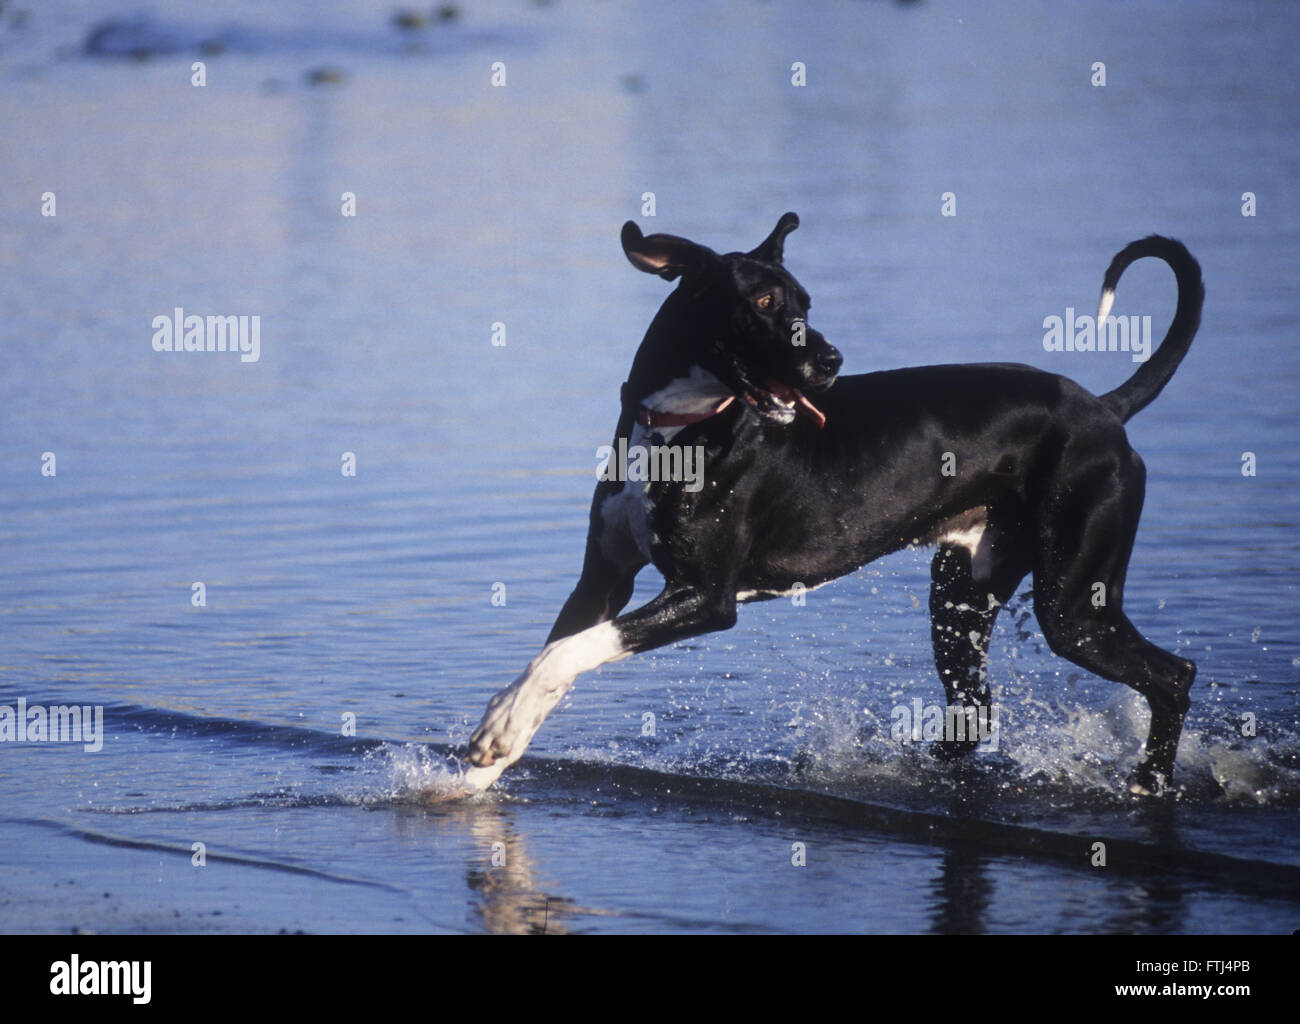 Uncropped (ears down) Great Dane running in the water and smile on face Stock Photo